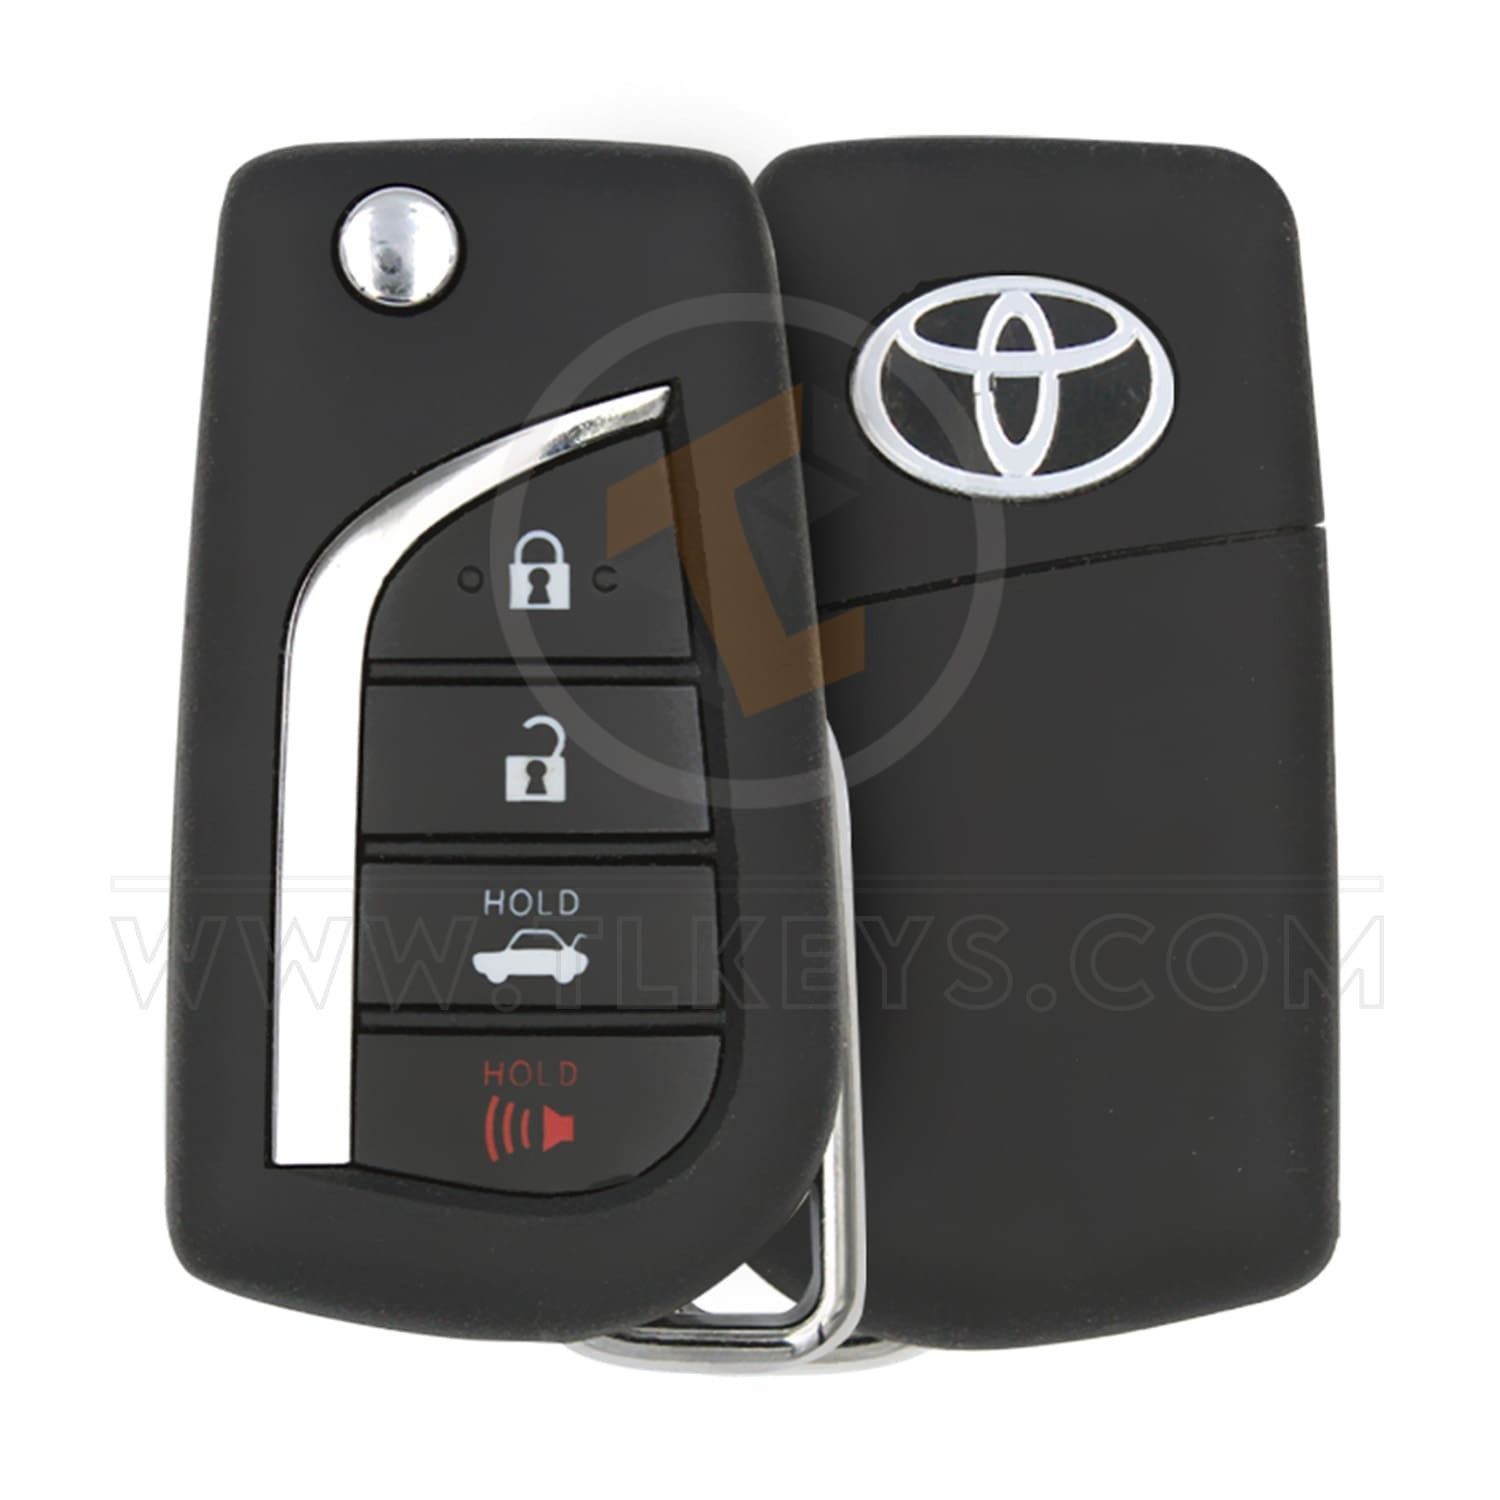  Toyota Camry Flip Key Remote 2018 2020 P/N: 89070-06790 315MHz Frequency 315MHz